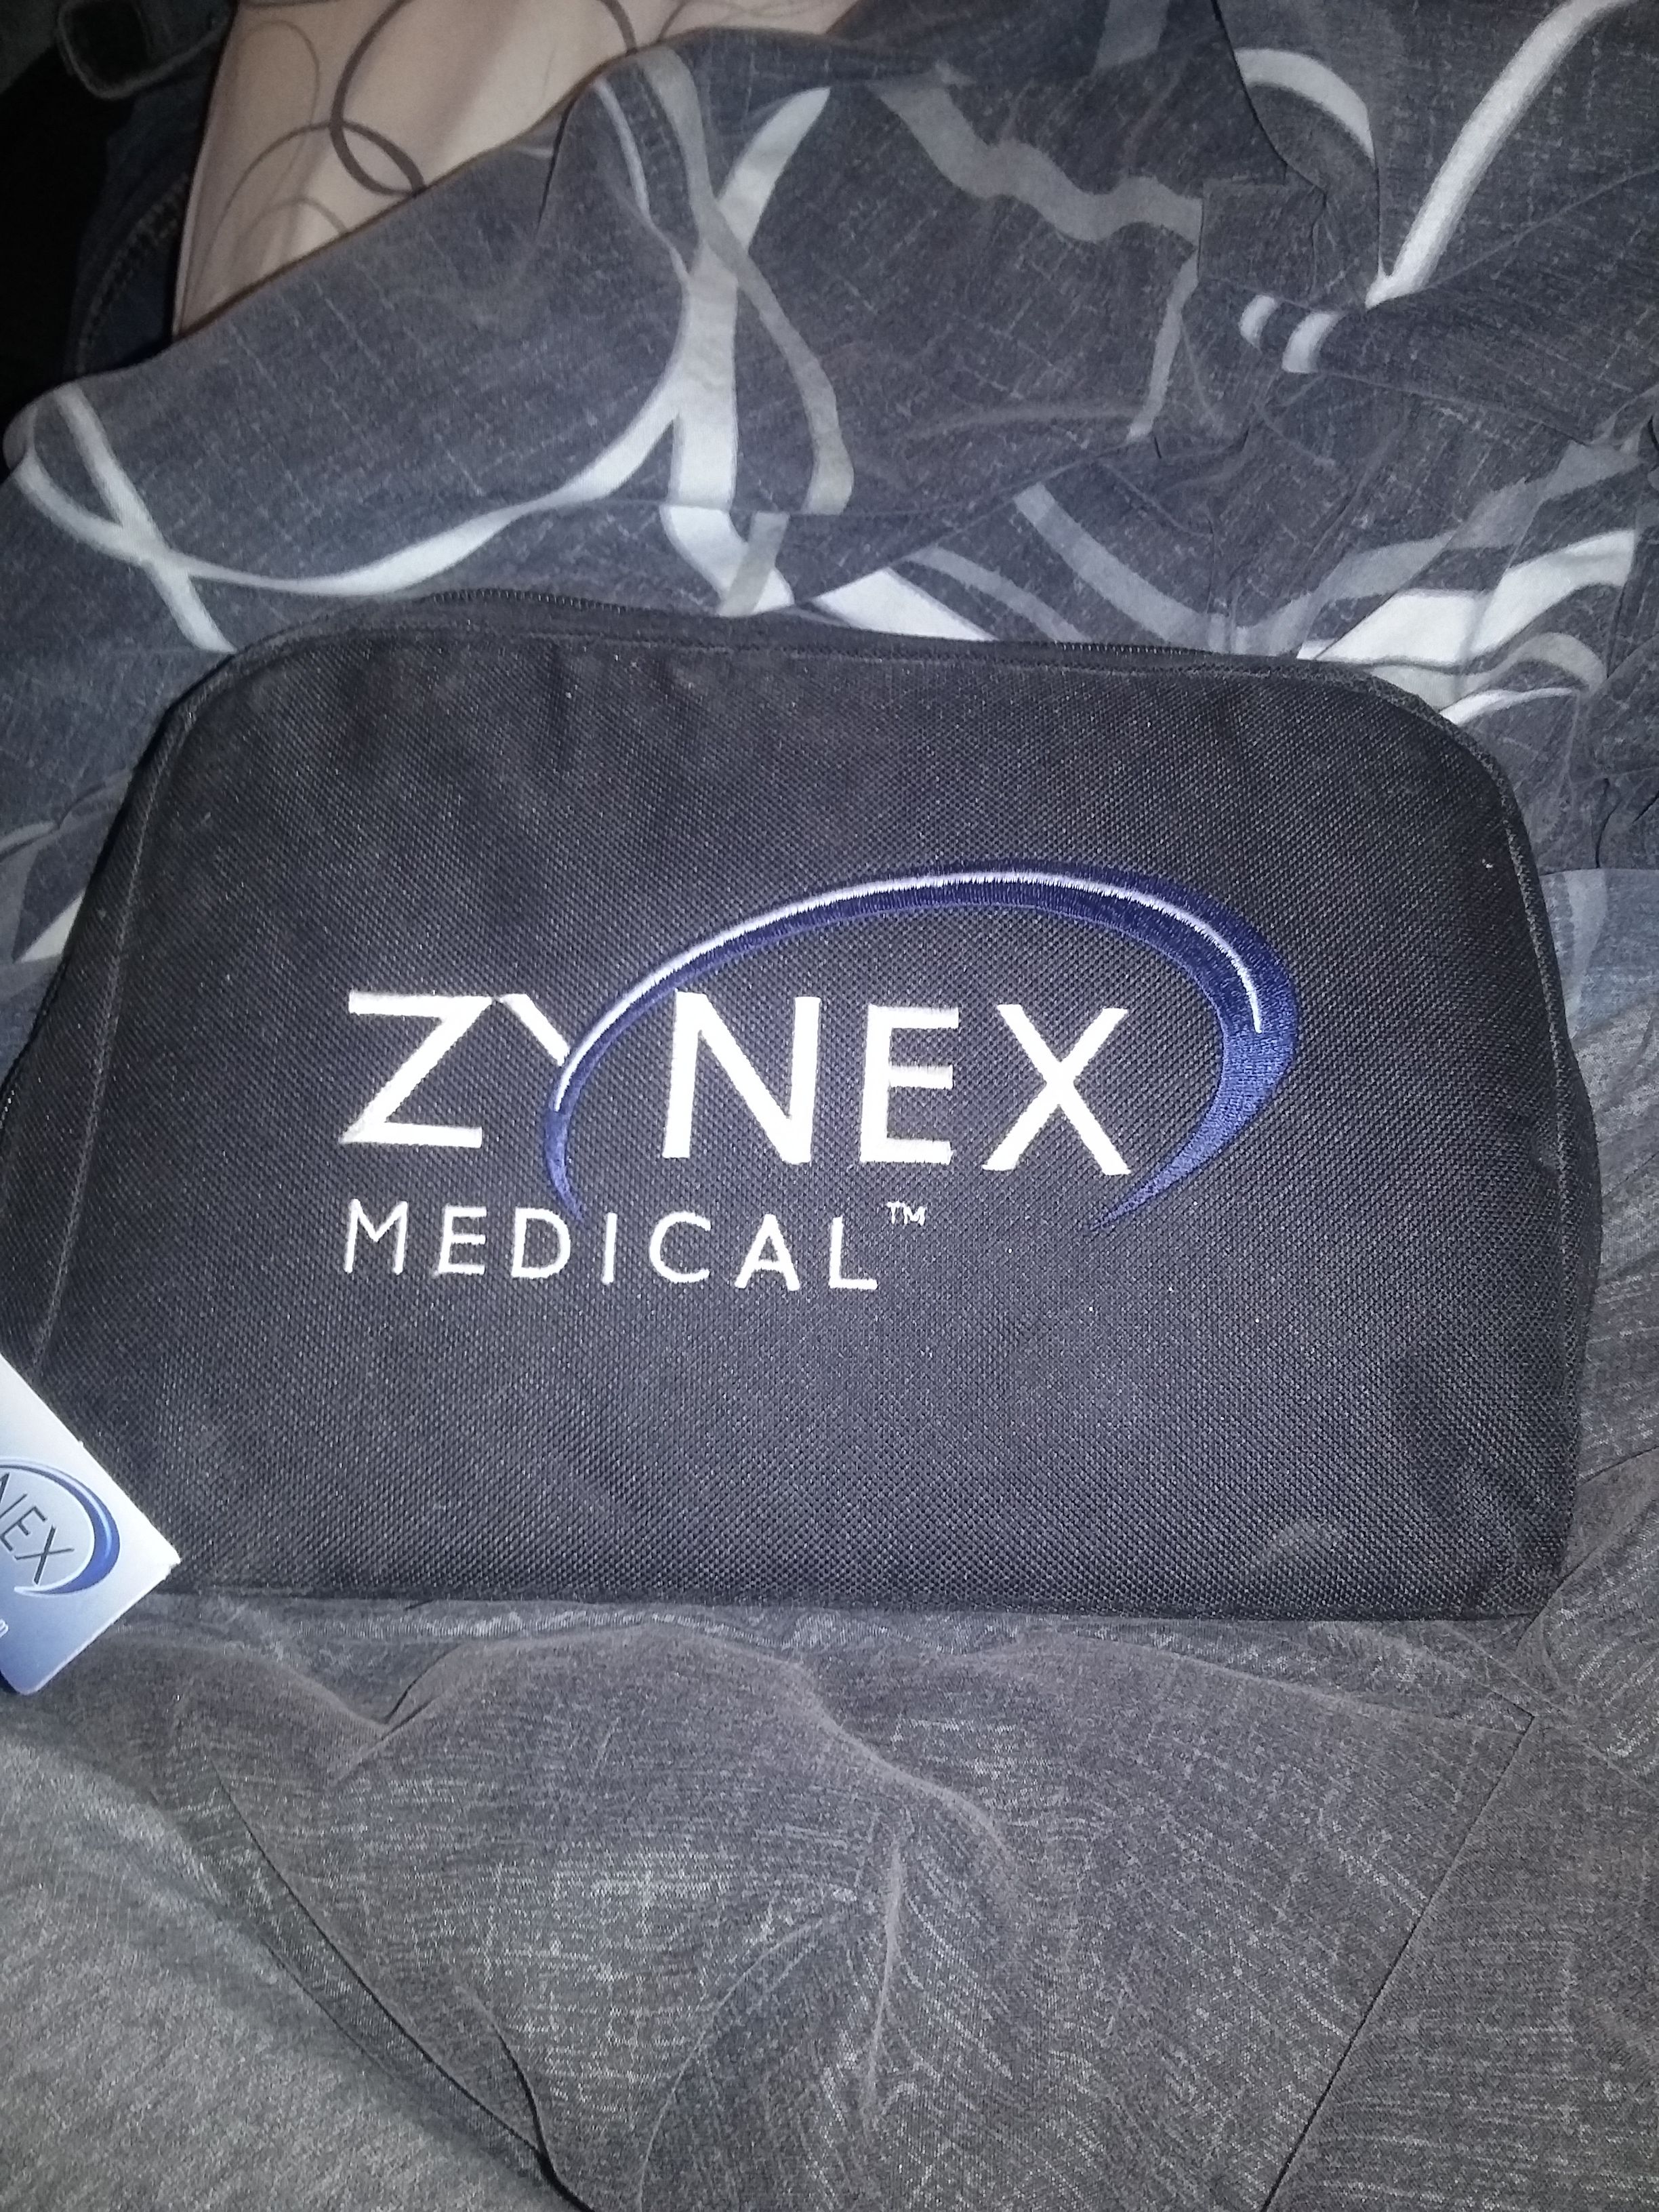 ZYNEX Medical NexWave TENS - general for sale - by owner - craigslist